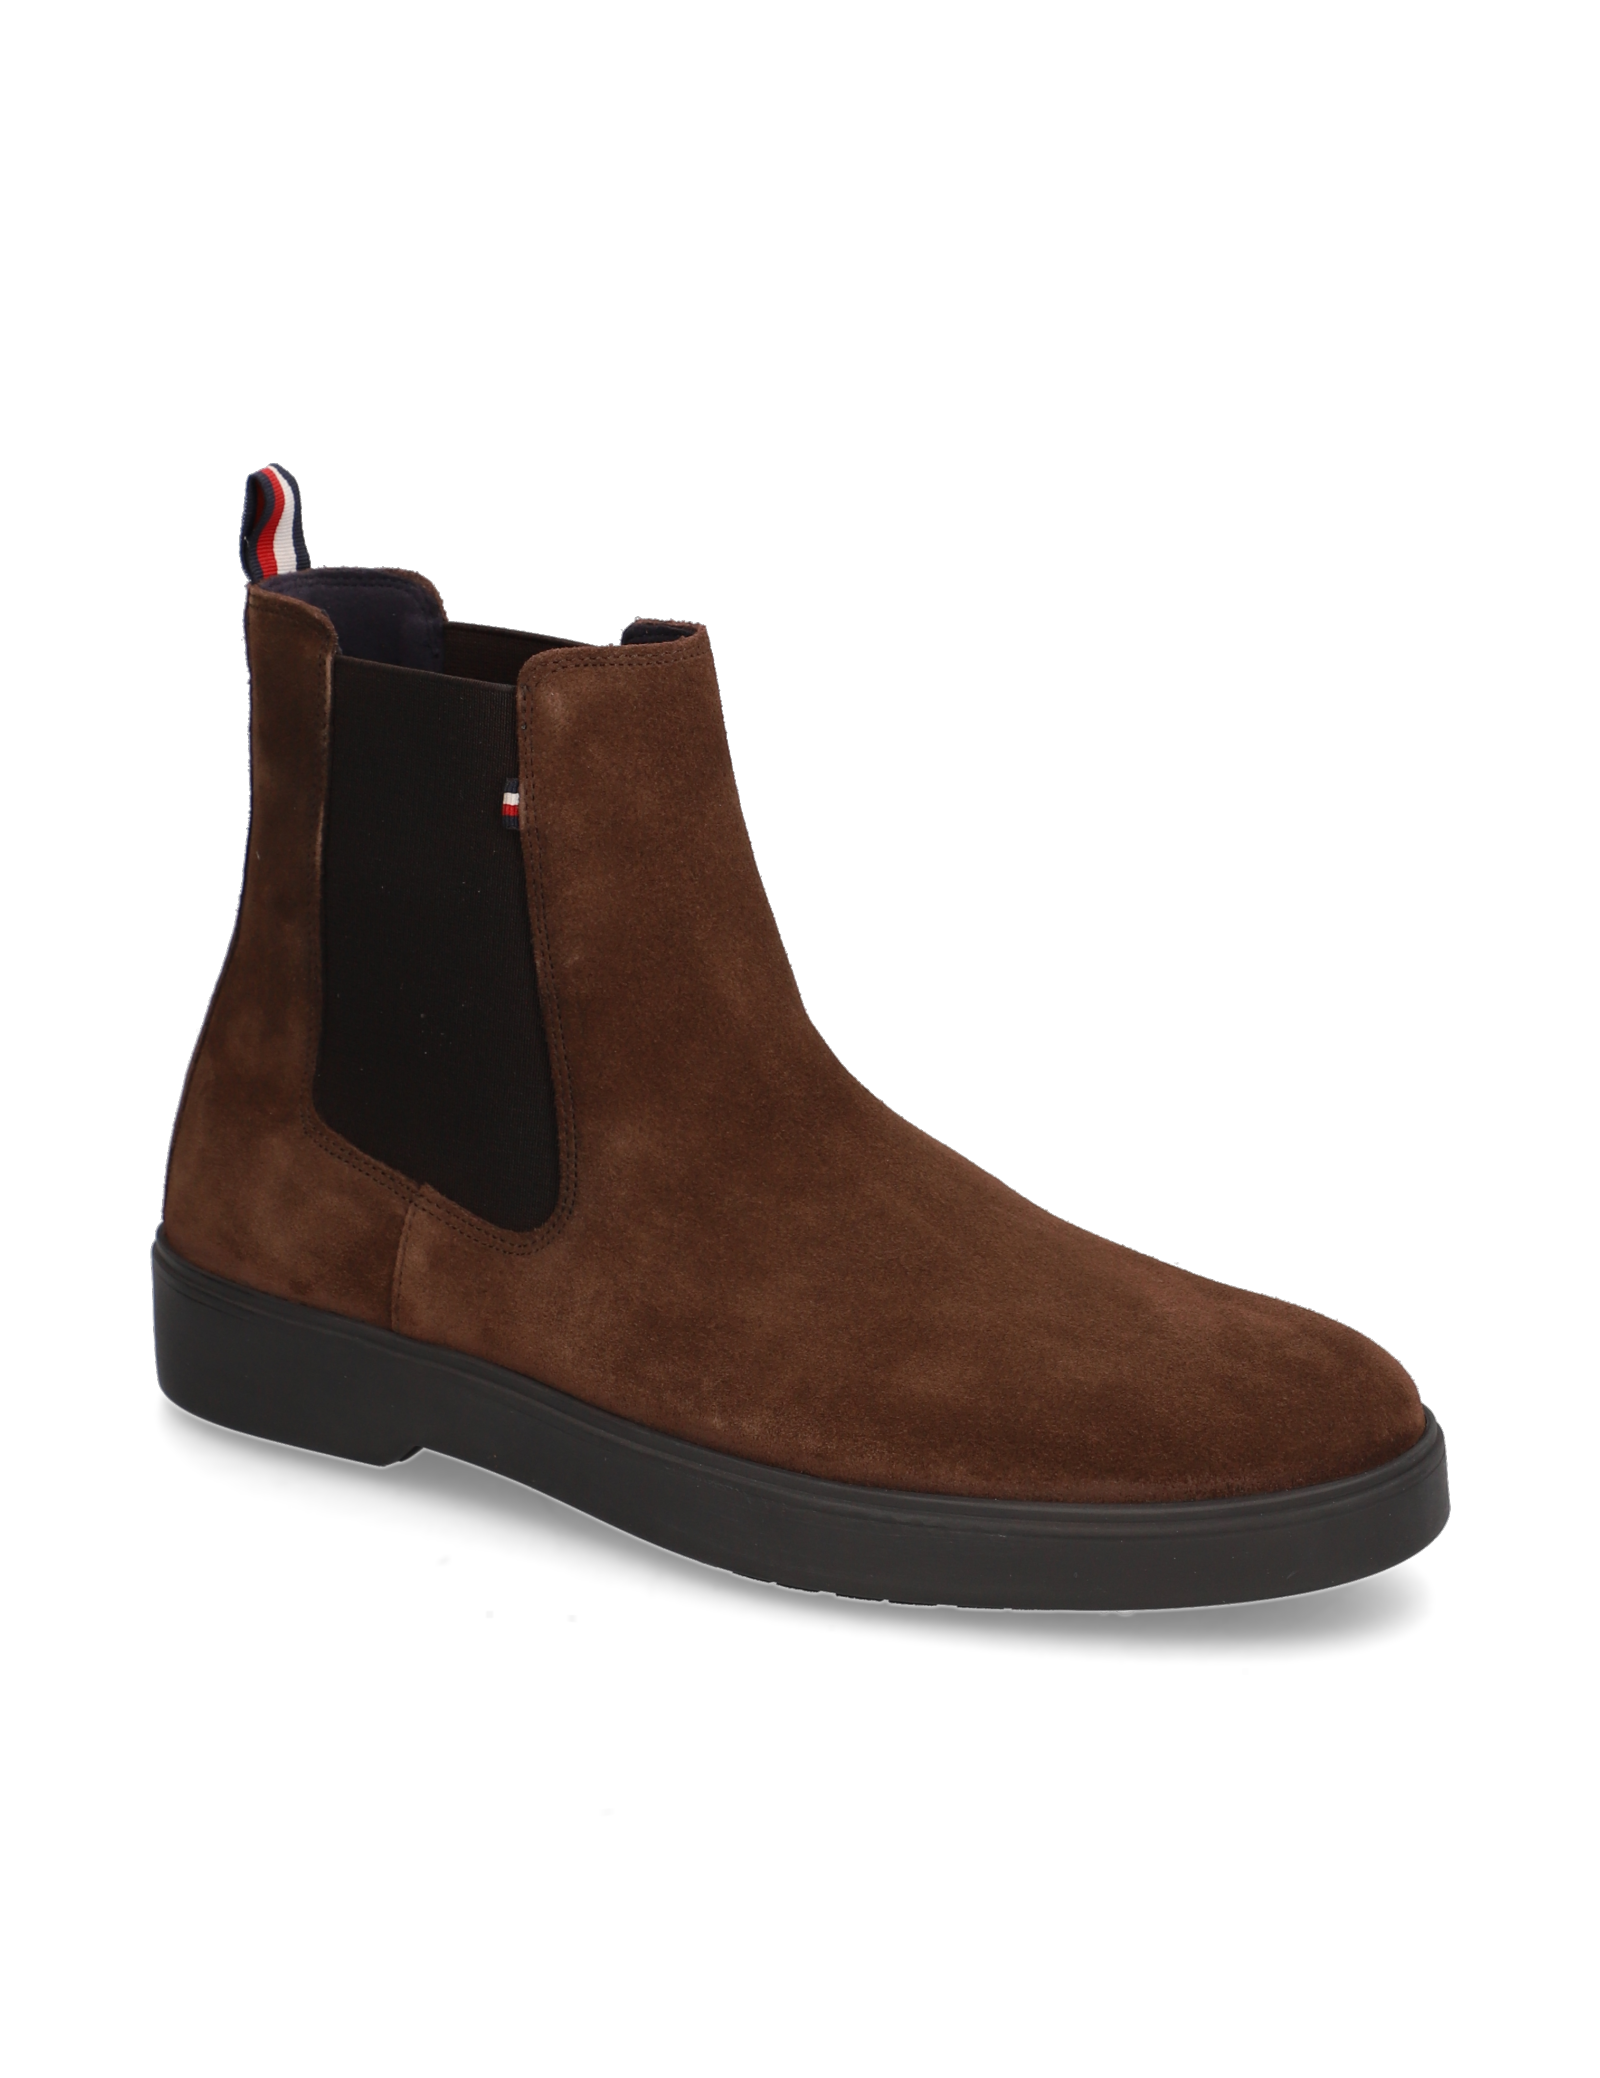 

Tommy Hilfiger CLASSIC HILFIGER SUEDE CHELSEA